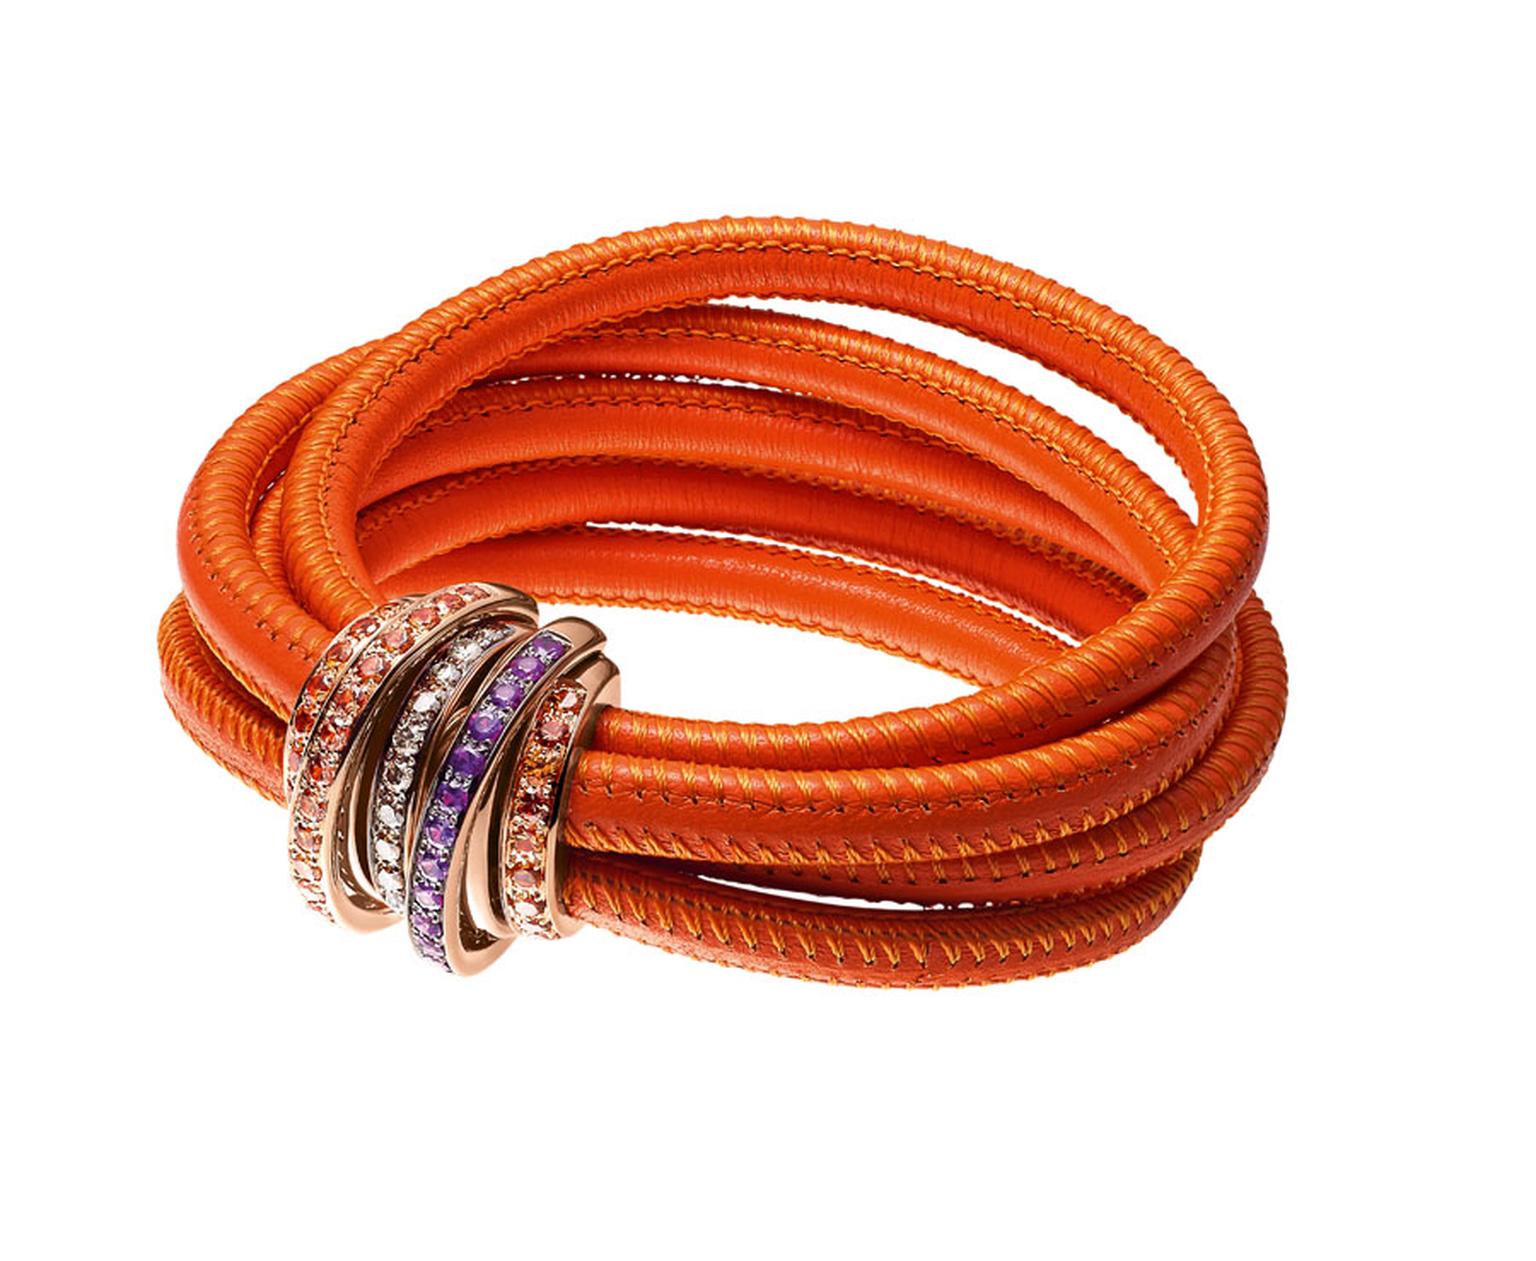 The ‘Allegra’ bracelet in bright orange, perfect for the summer.